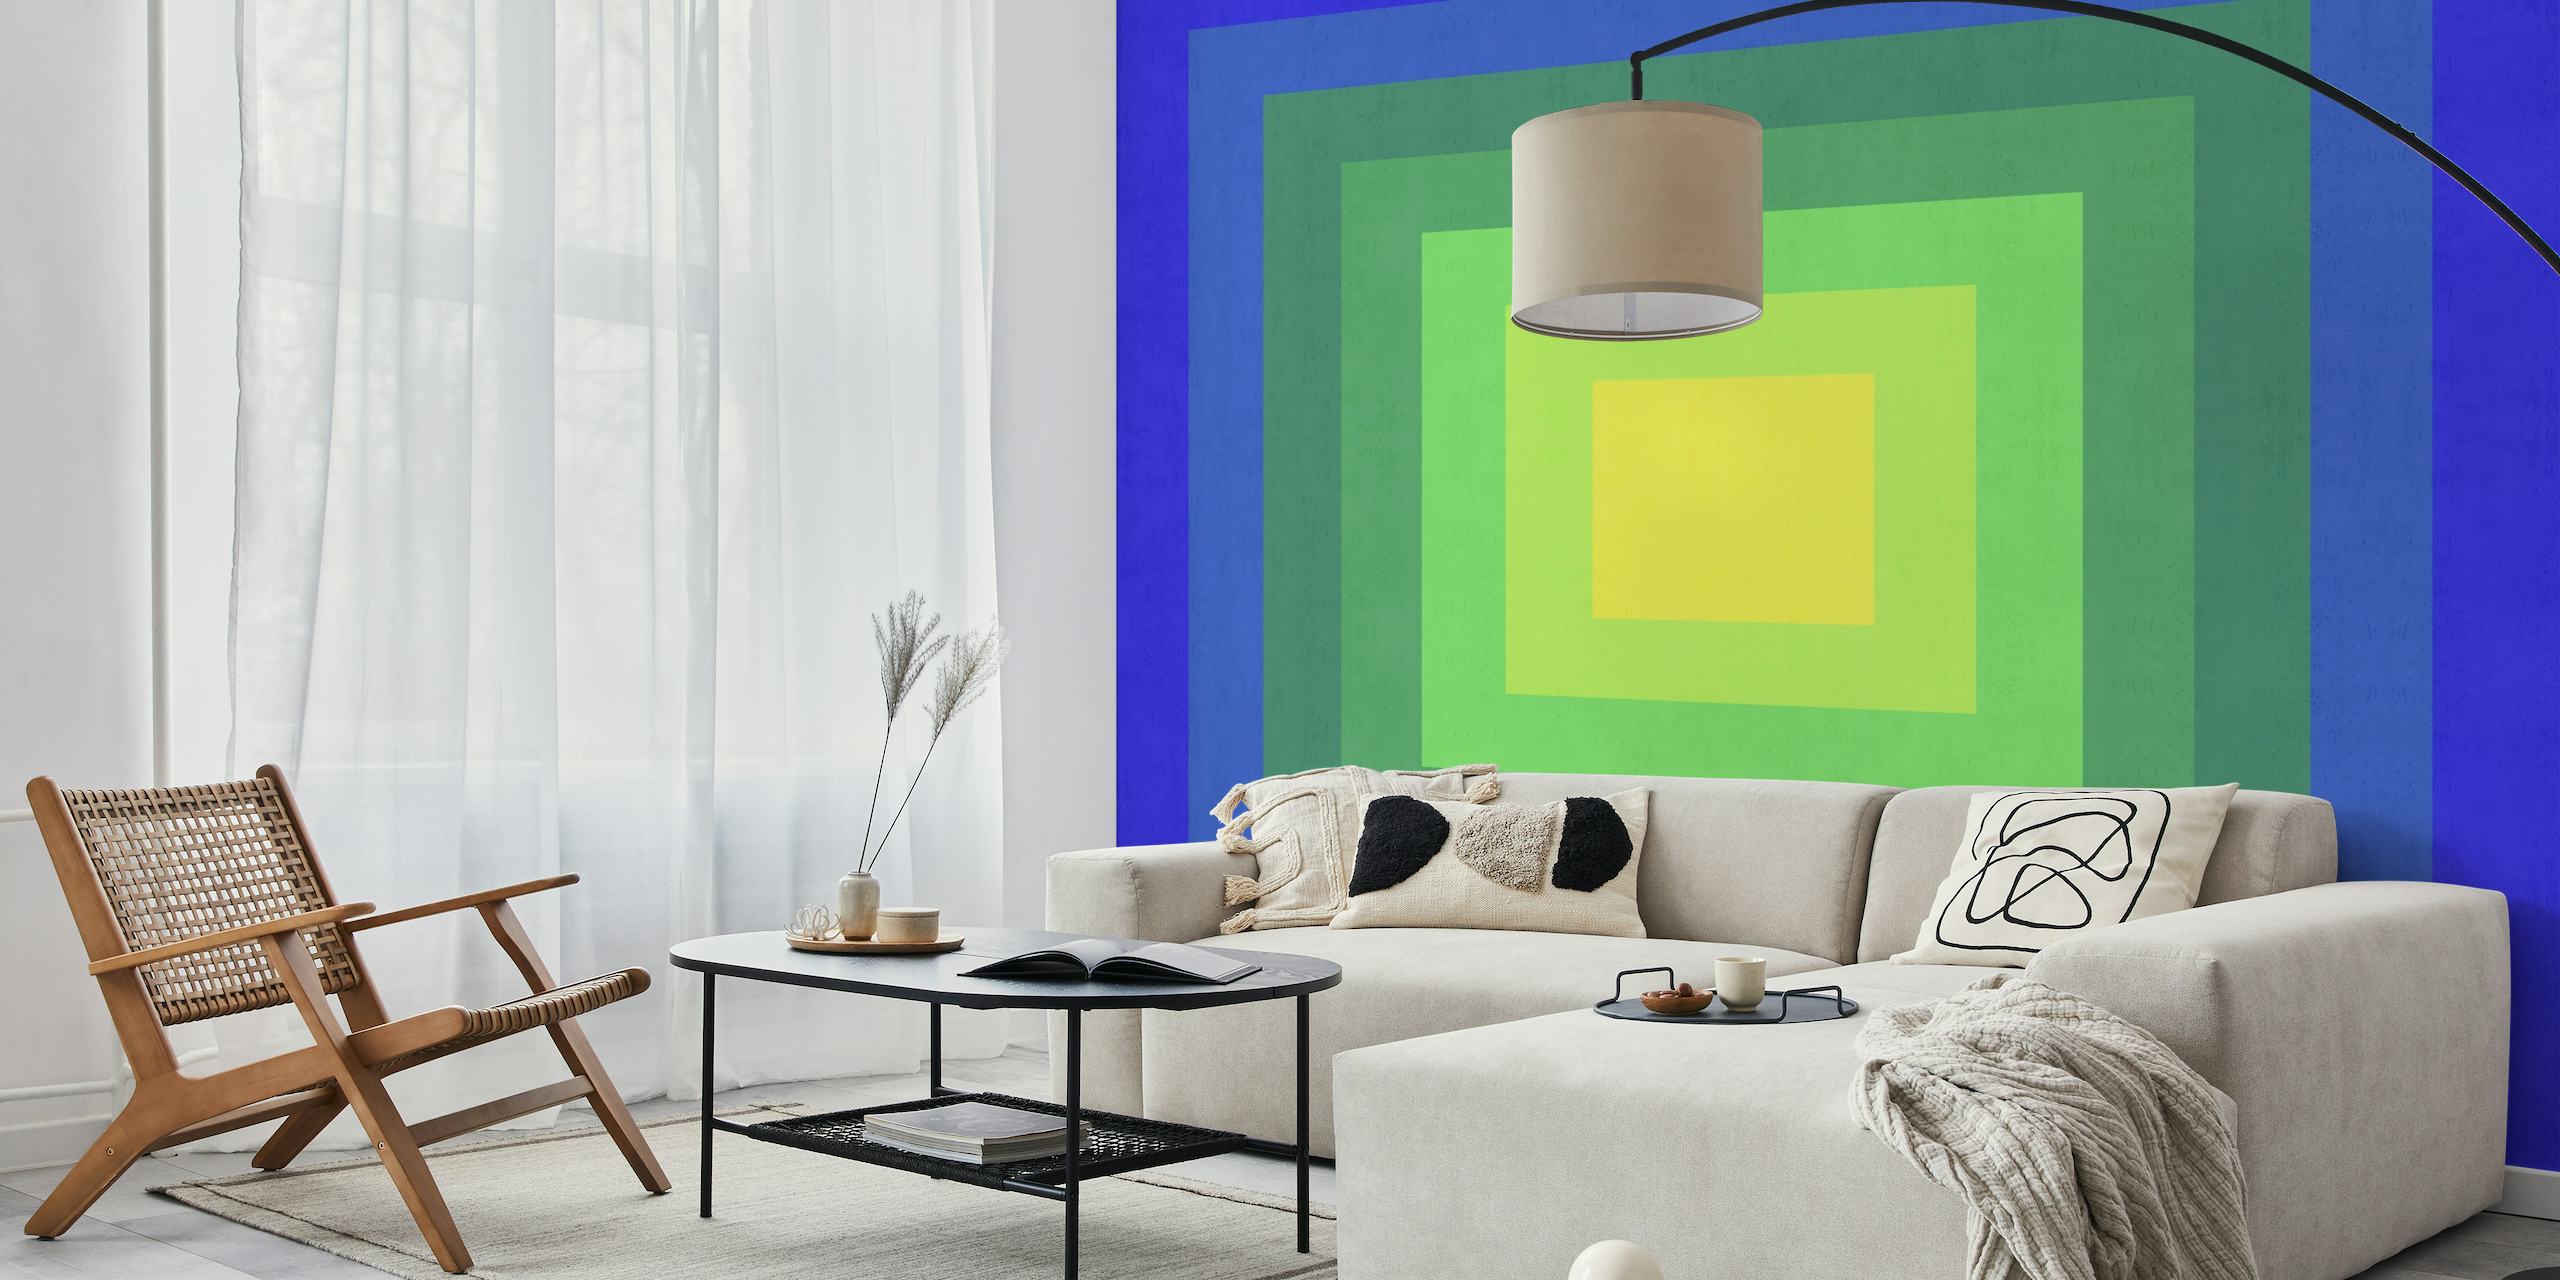 Wall mural of an abstract gradient tunnel design with squares in blue to yellow shades.